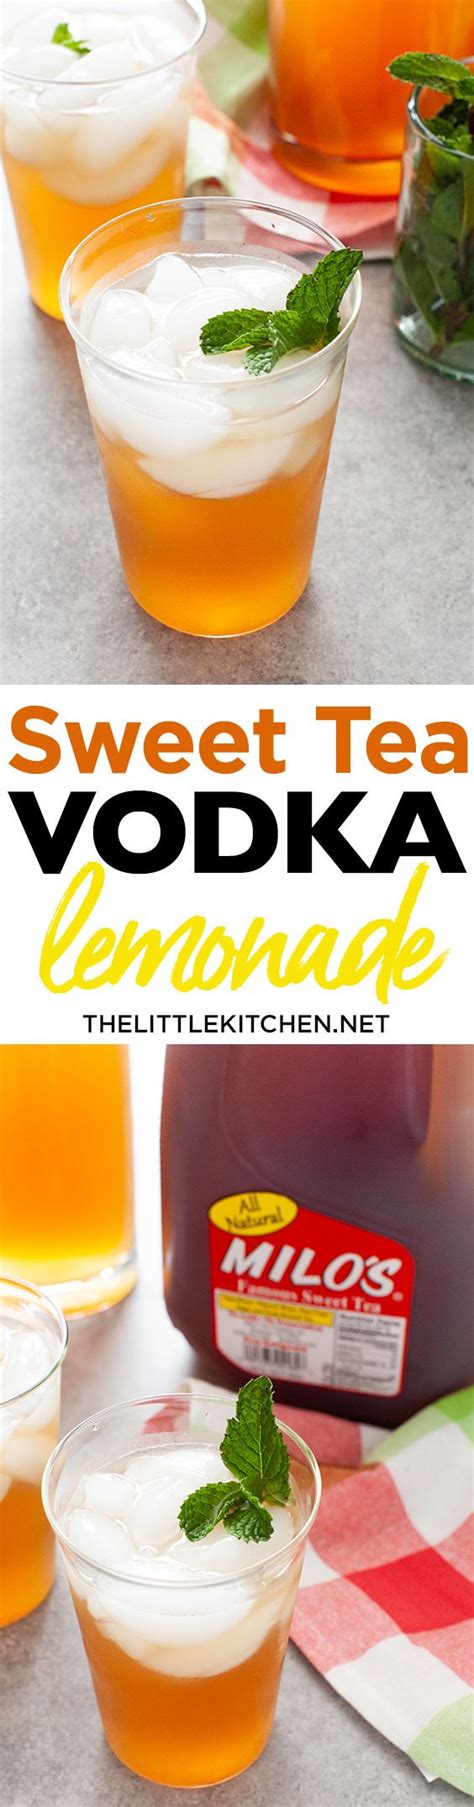 Basil vodka lemonade {cocktail or mocktail}. Sweet Tea with Vodka and Lemonade made with @DrinkMilos! It's only three ingredients plus ice ...